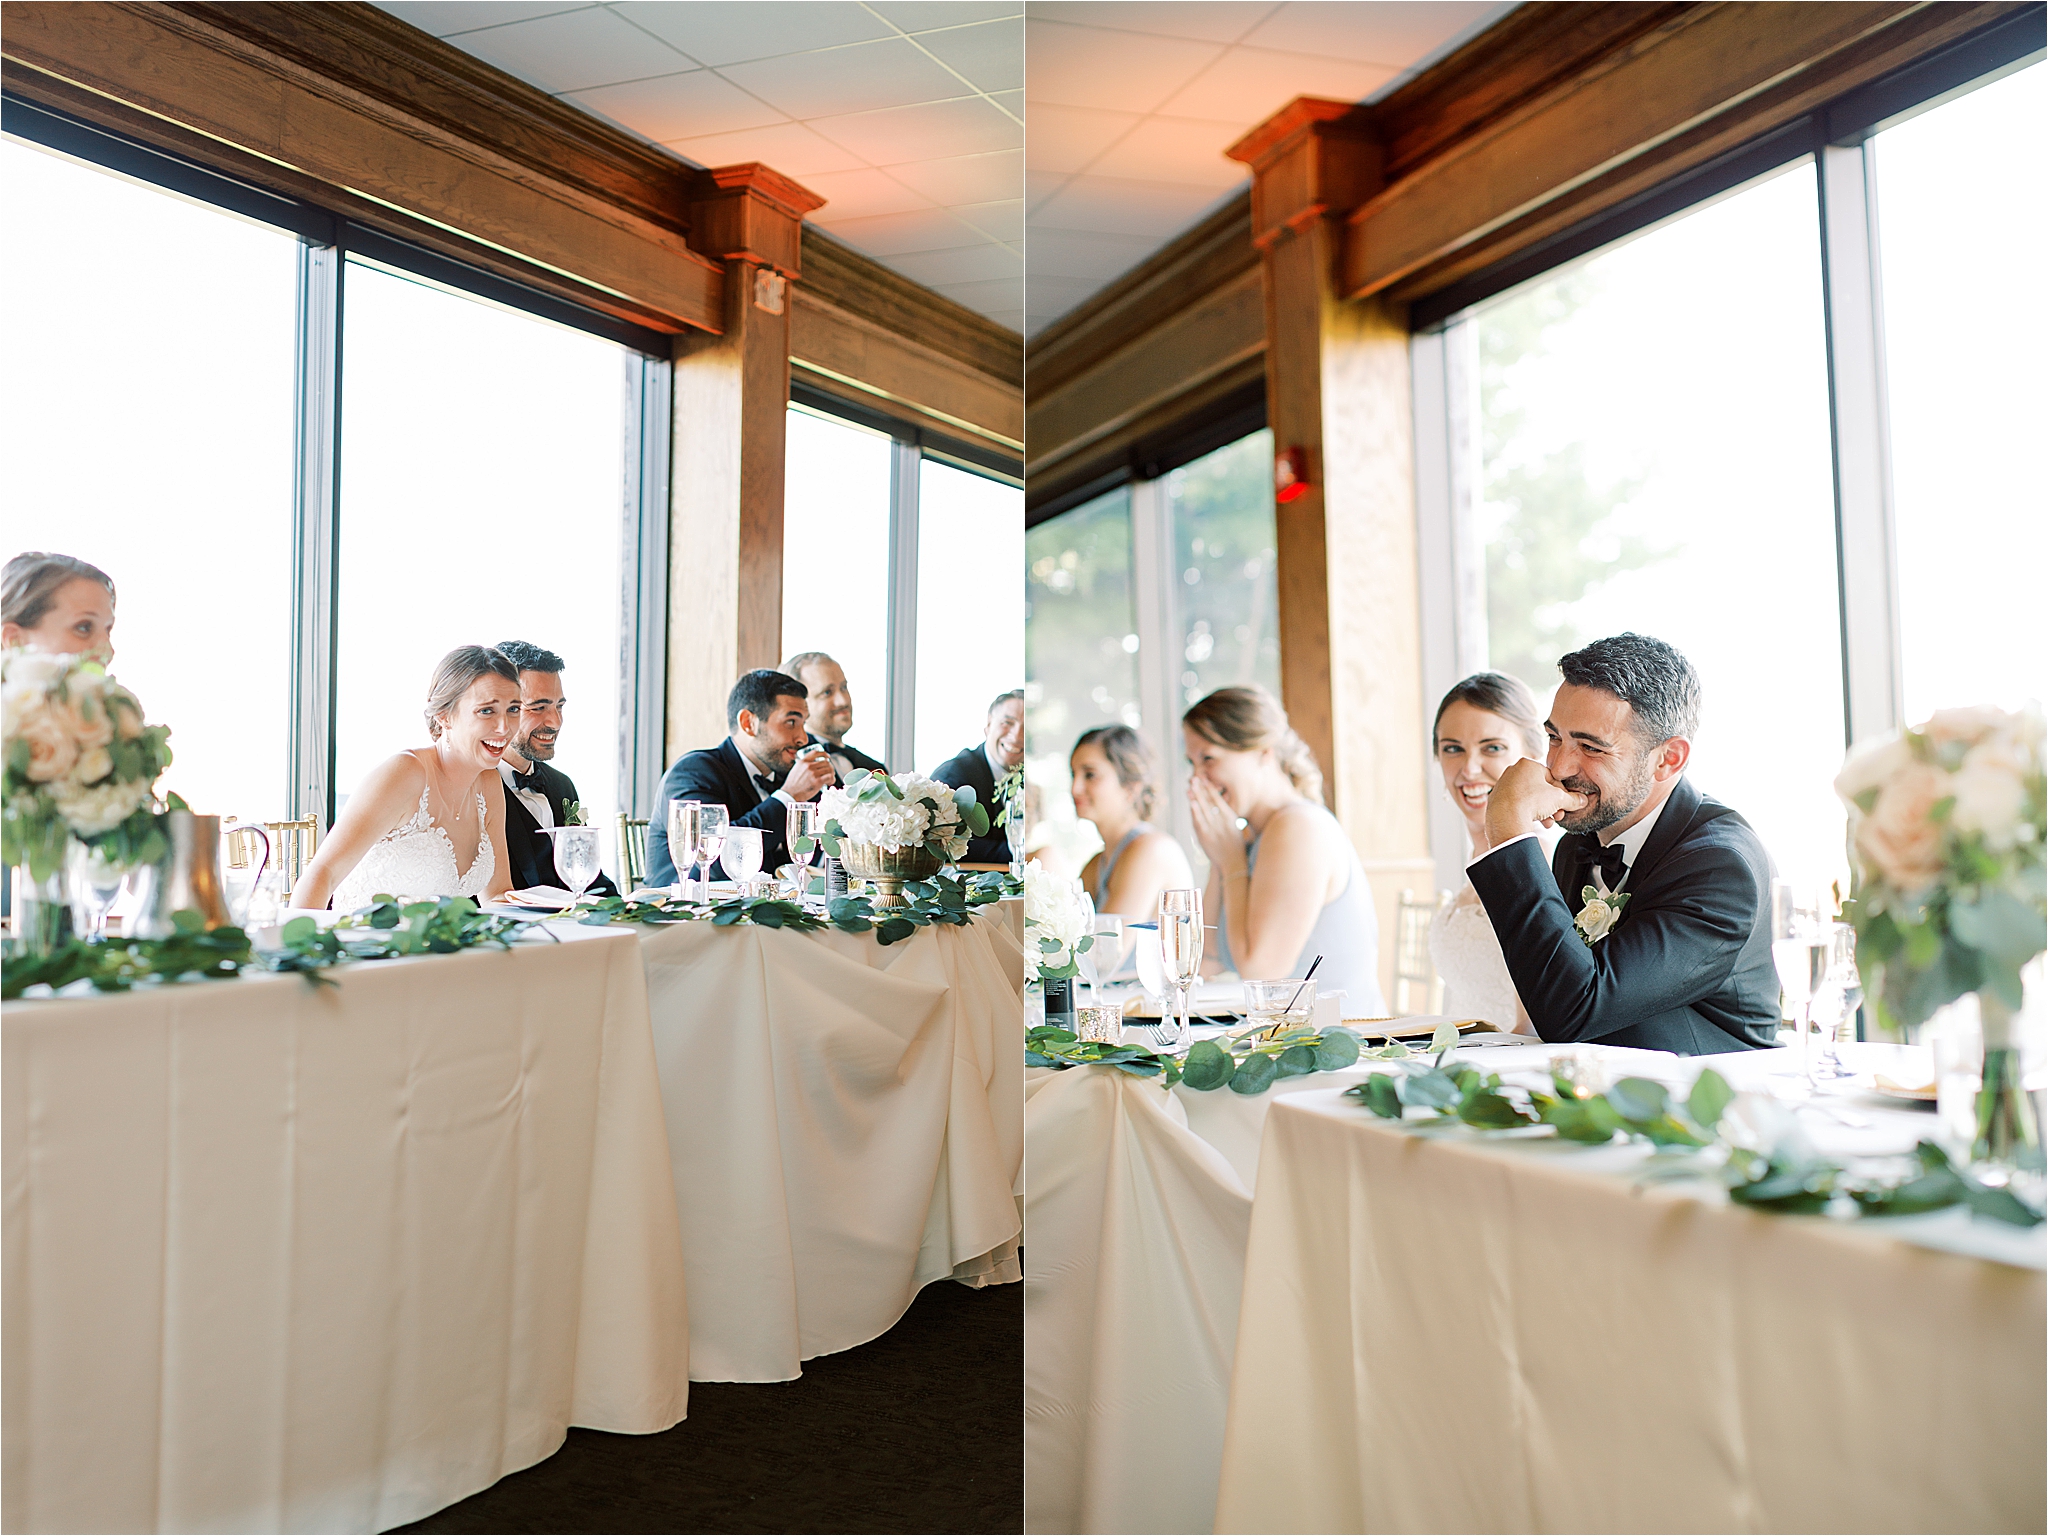 Bride and groom react to speeches at wedding